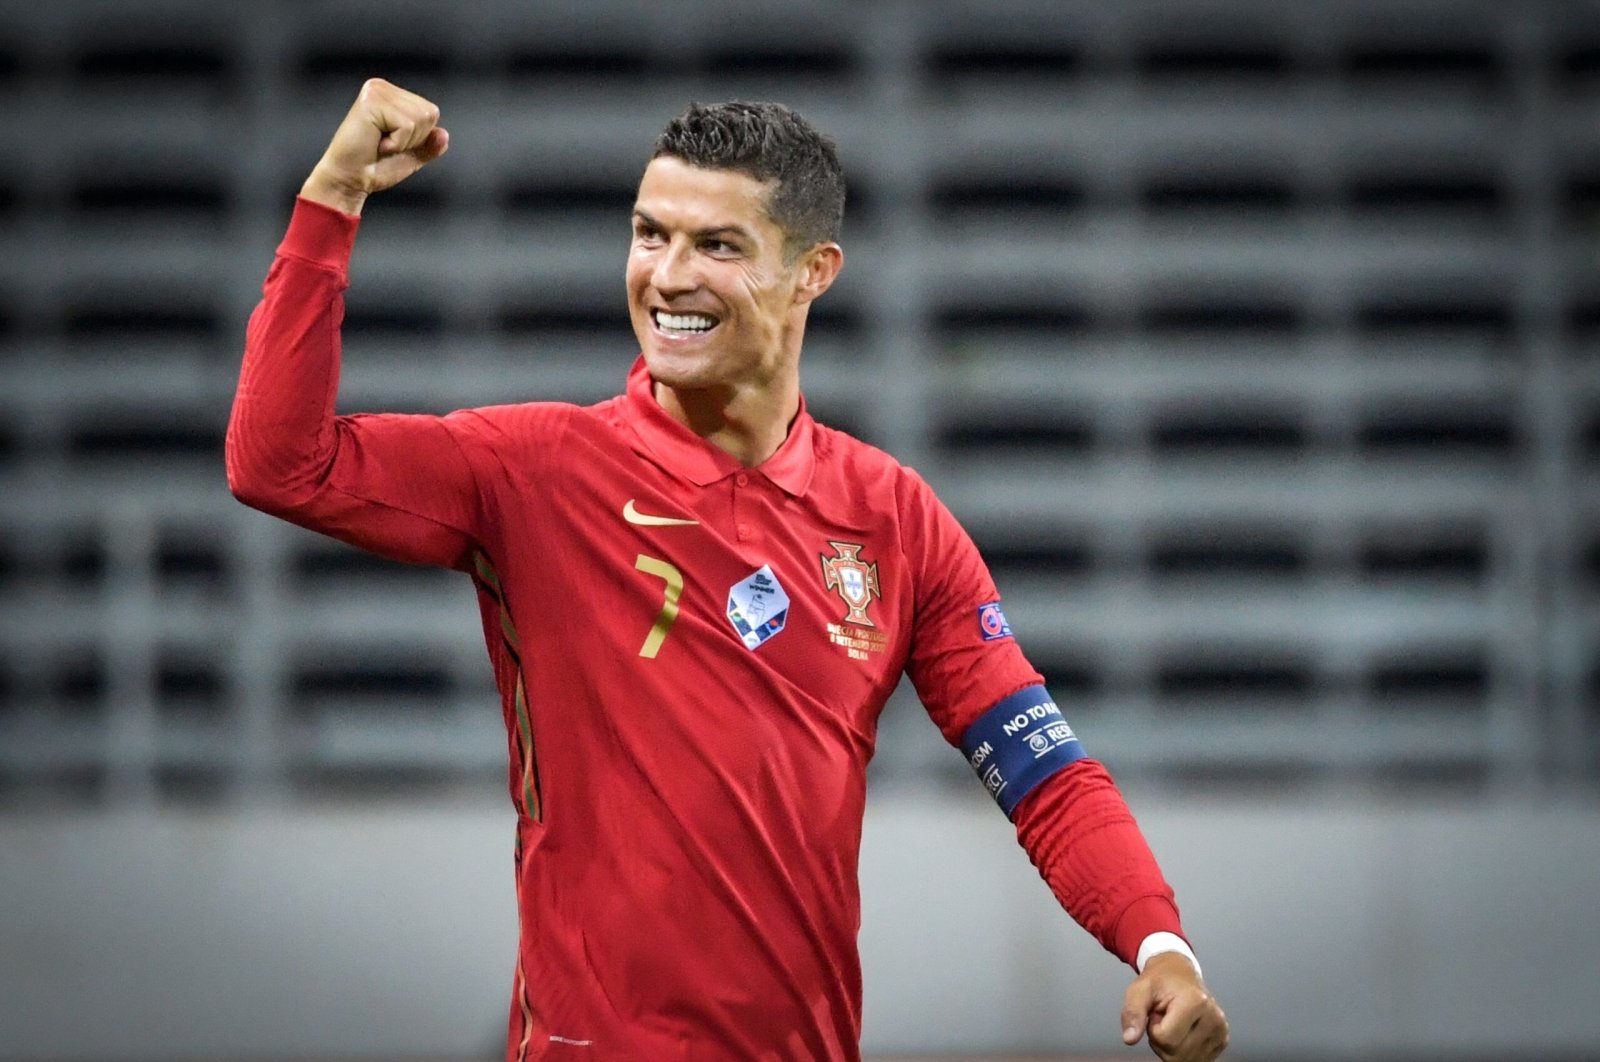 Portugal forward Cristiano Ronaldo celebrates after scoring his 100th goal for Portugal, during the UEFA Nations League football match against Sweden, Sept. 8, 2020. (TT NEWS AGENCY / AFP Photo)